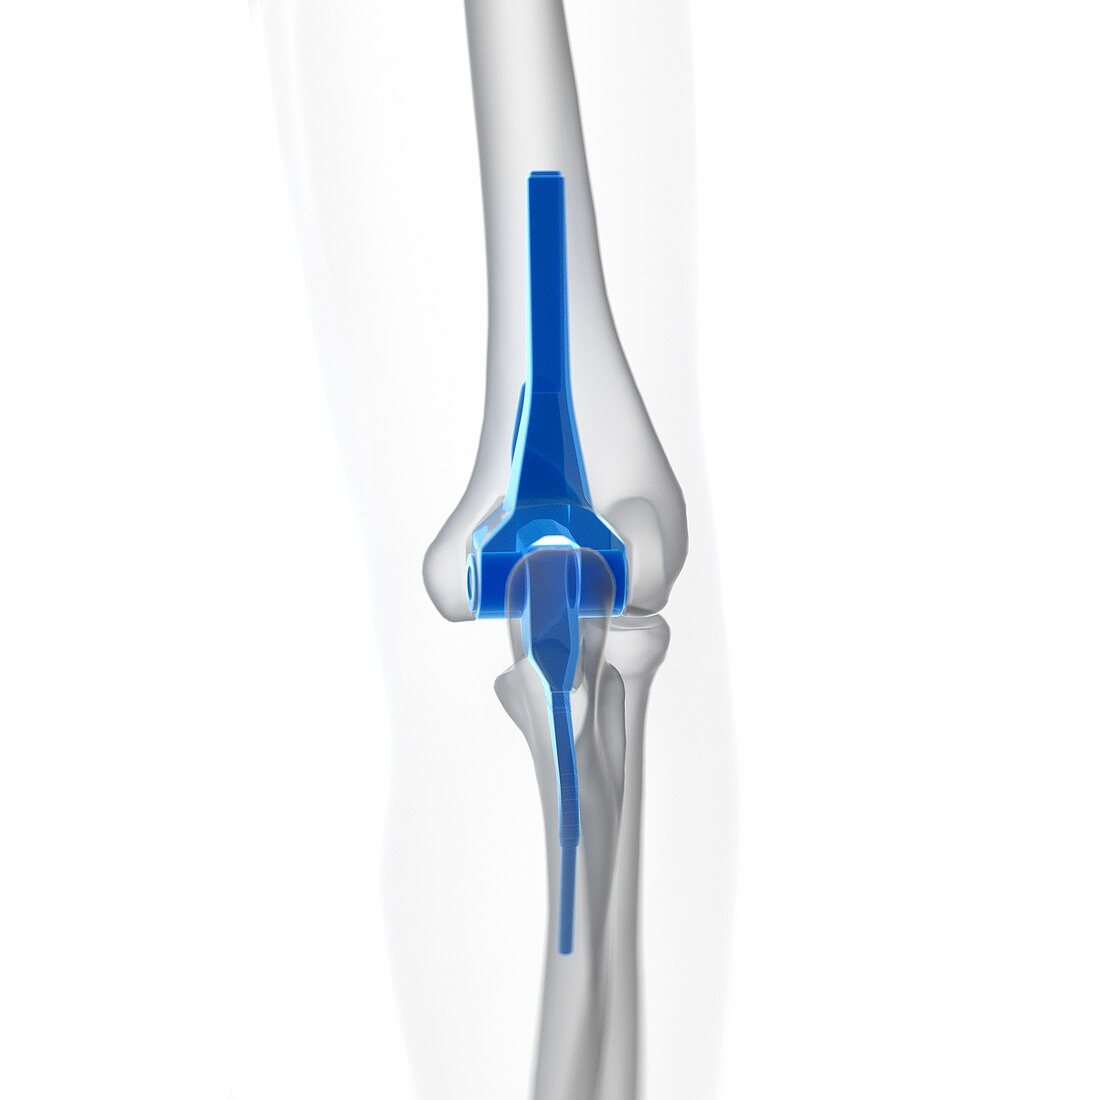 Illustration of an elbow replacement